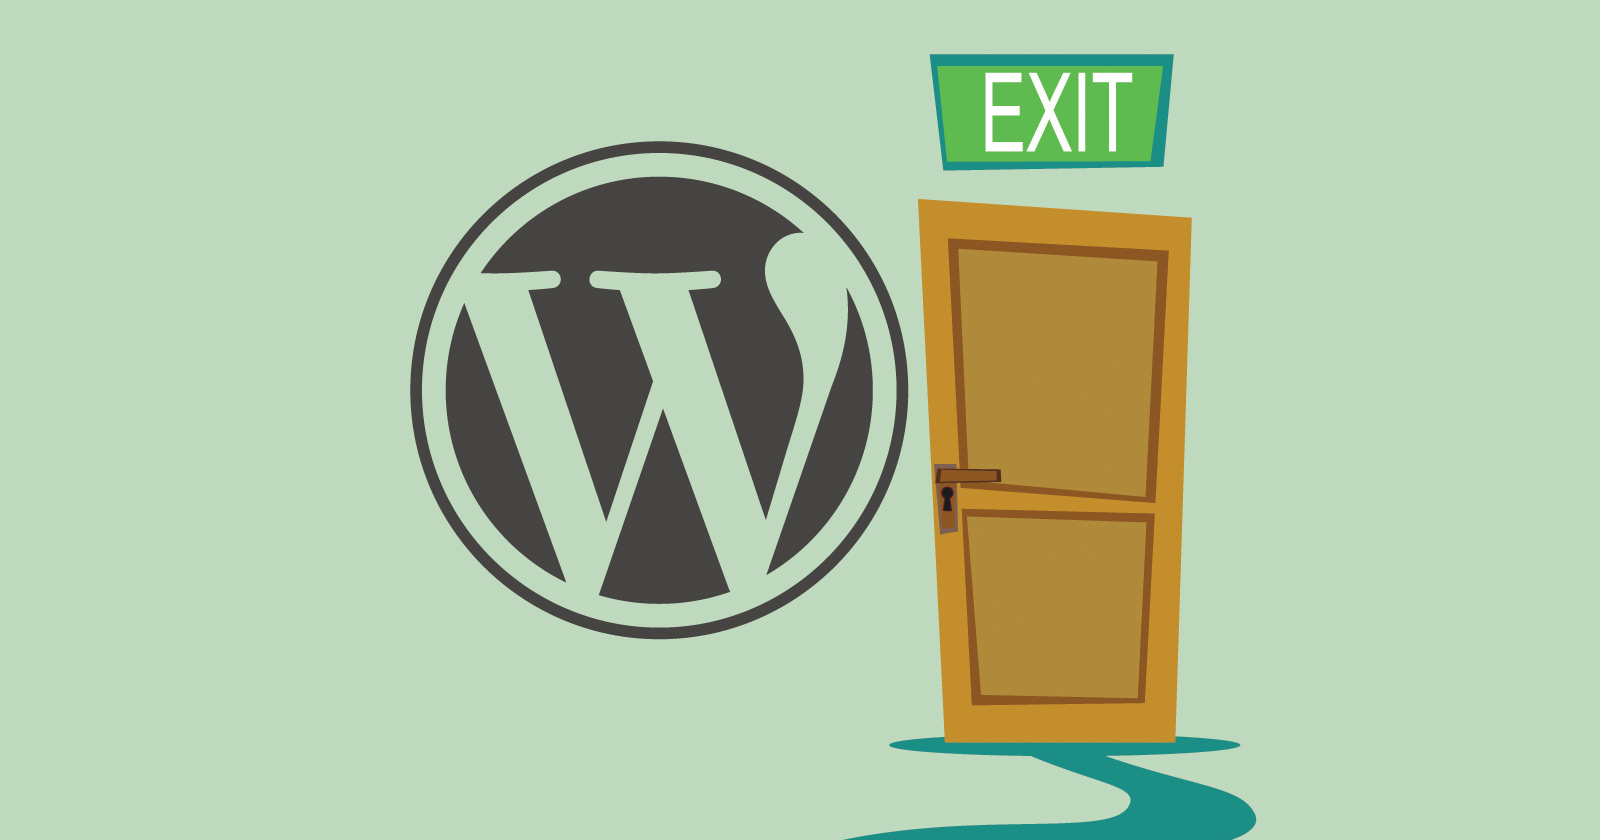 WordPress Migration Guides Undermining Divi, Elementor And Wix?